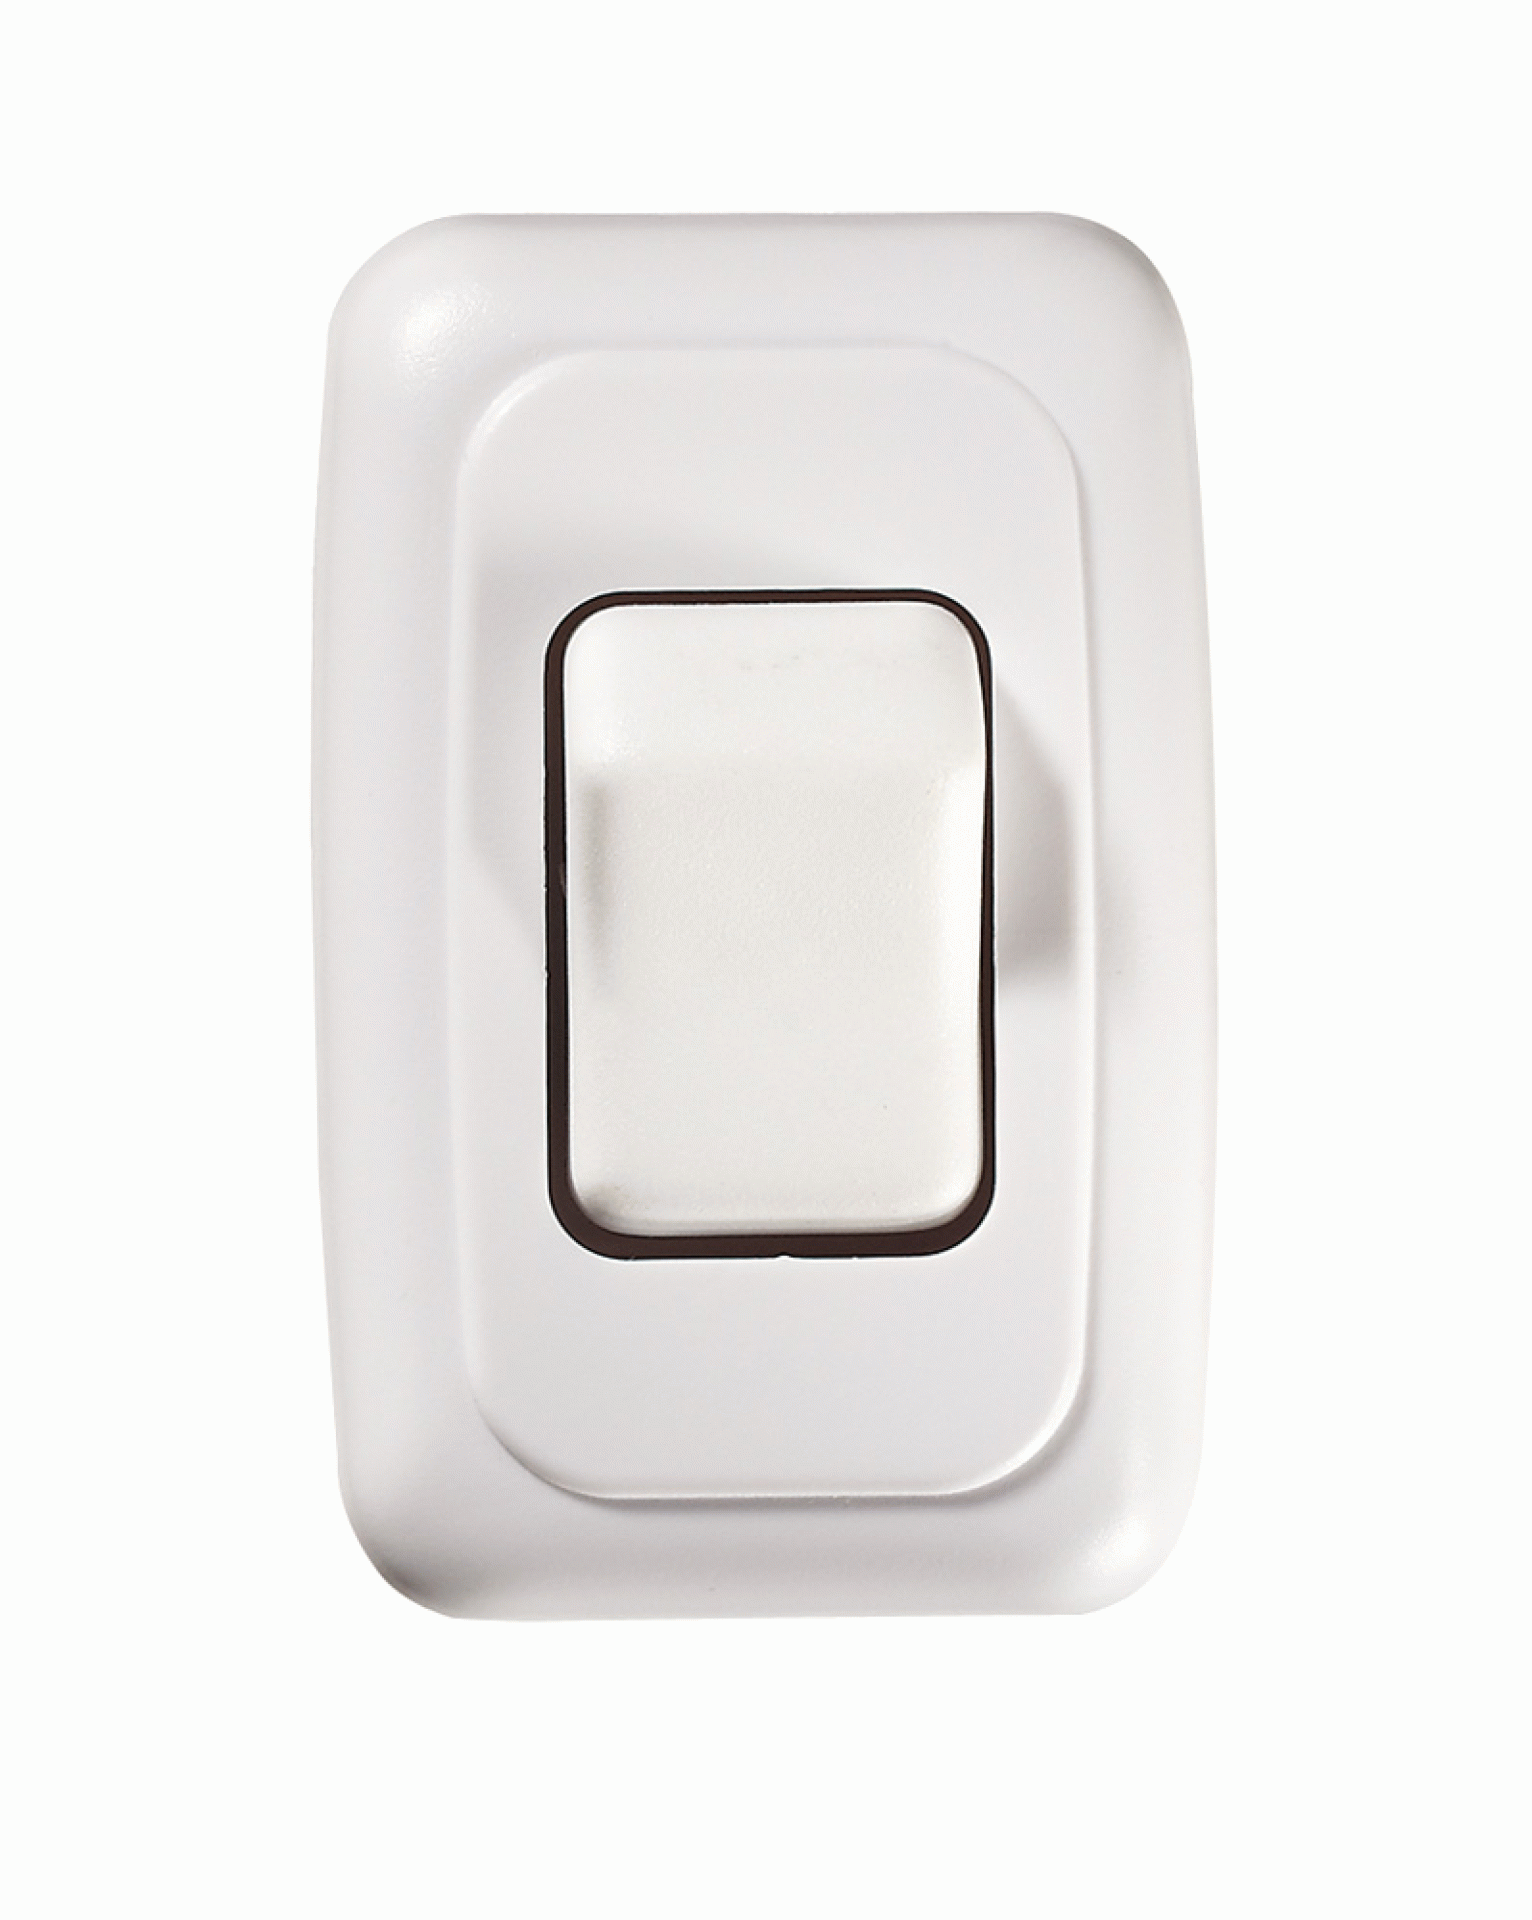 RV DESIGNER COLLECTION | S531 | Contoured Wall Switch White Single On/Off SPST